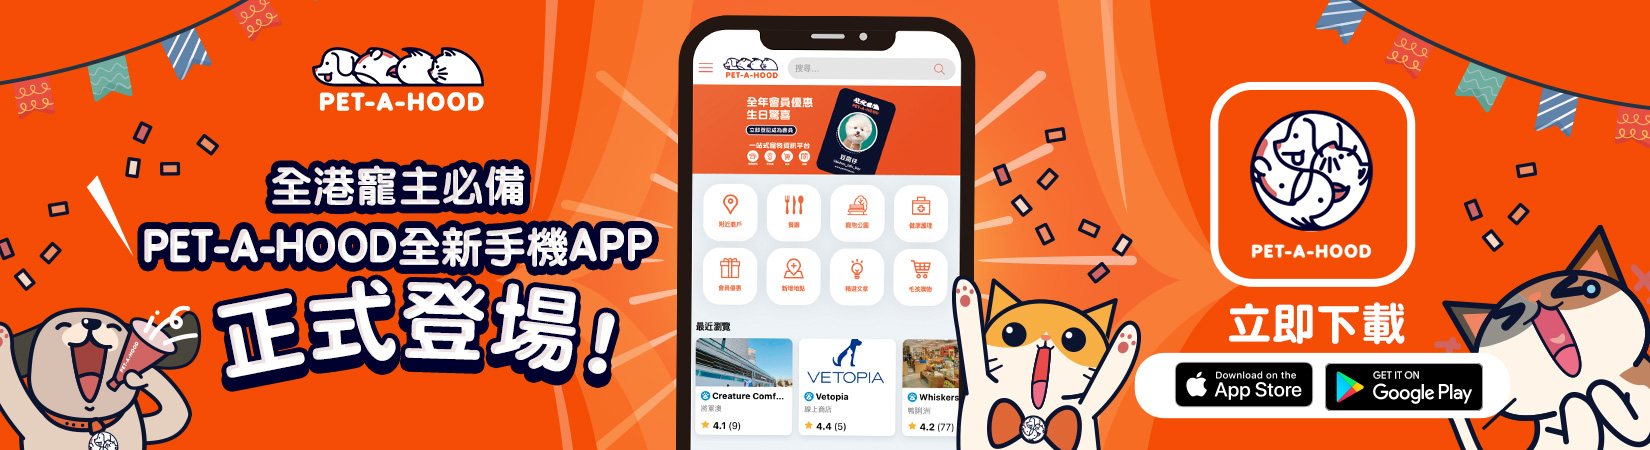 Must-Have for All Pet Owners in Hong Kong | PET-A-HOOD Newest Mobile APP The Most Comprehensive Cat and Dog Pet Profile